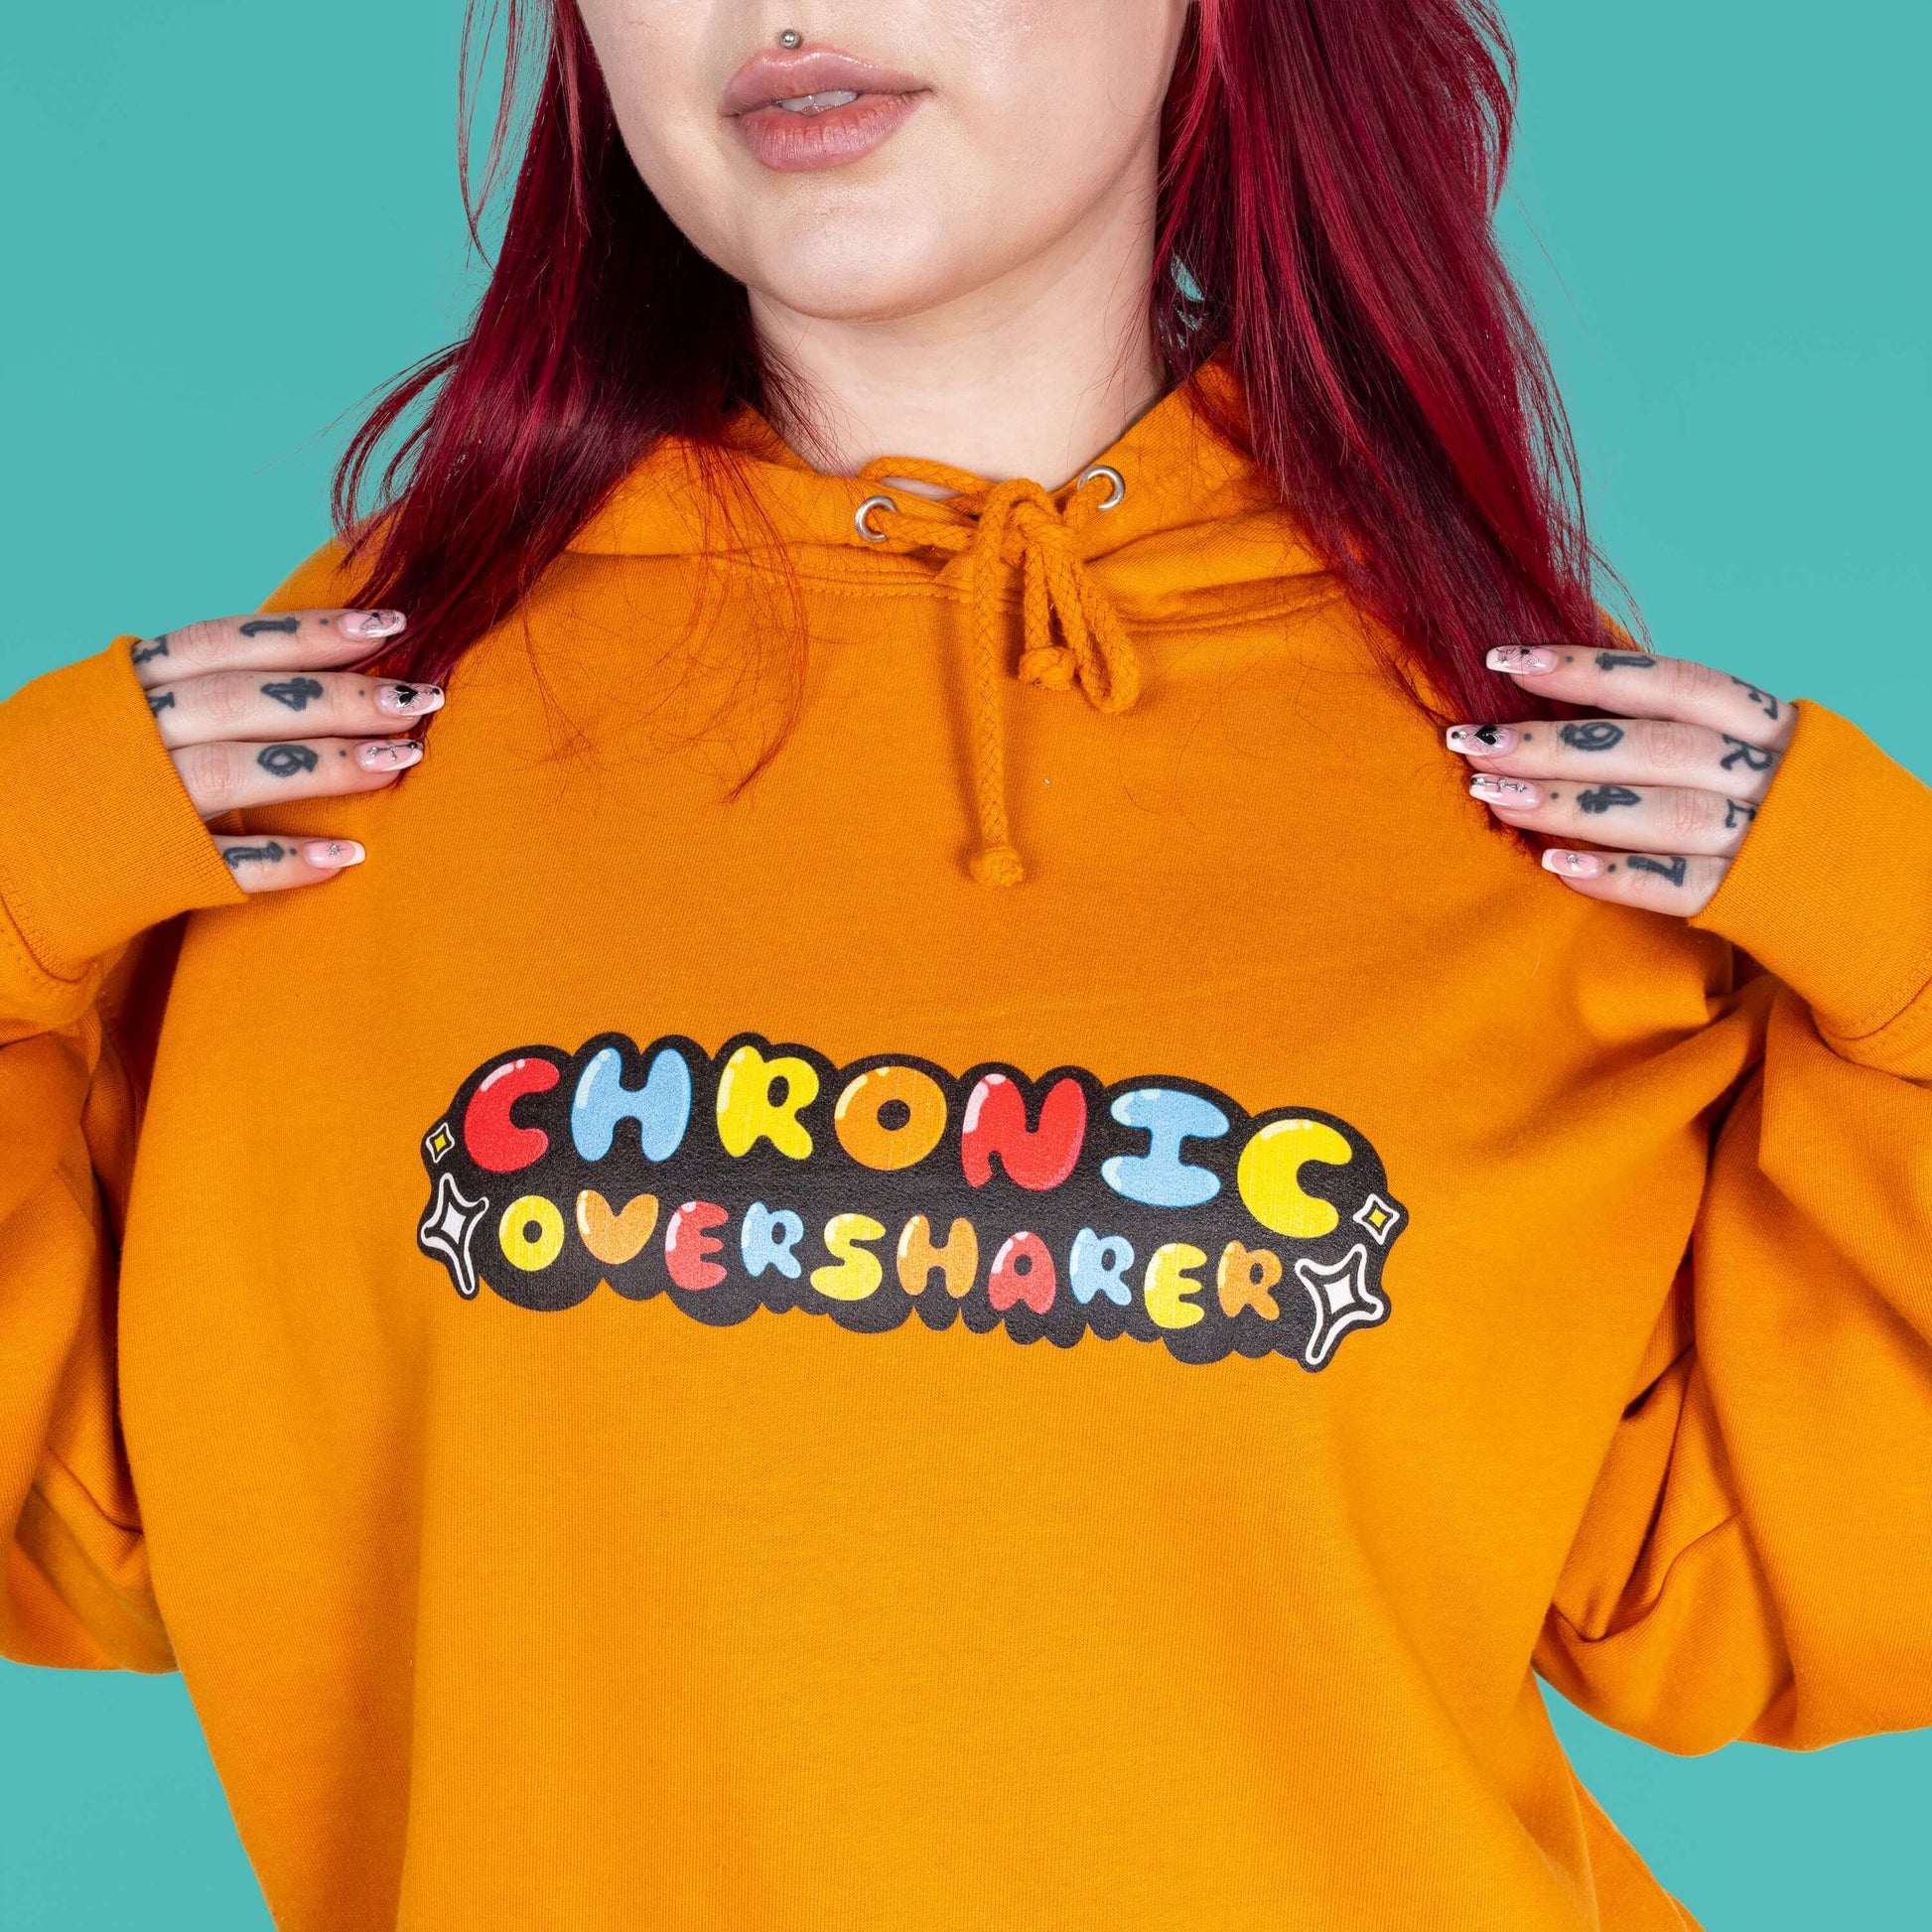 The Chronic Over Sharer Pumpkin Orange Hoodie modelled on Flo, a red haired alternative model, in front of a blue background. She is facing forward with both hands resting on her shoulders, the photo is cropped in on the middle. The pumpkin orange hoodie features a drawstring hood, a large front pocket and the text 'chronic oversharer' in rainbow bubble font with a black shadow effect and white sparkles. The design was created to raise awareness for neurodivergent disorders such as ADHD.